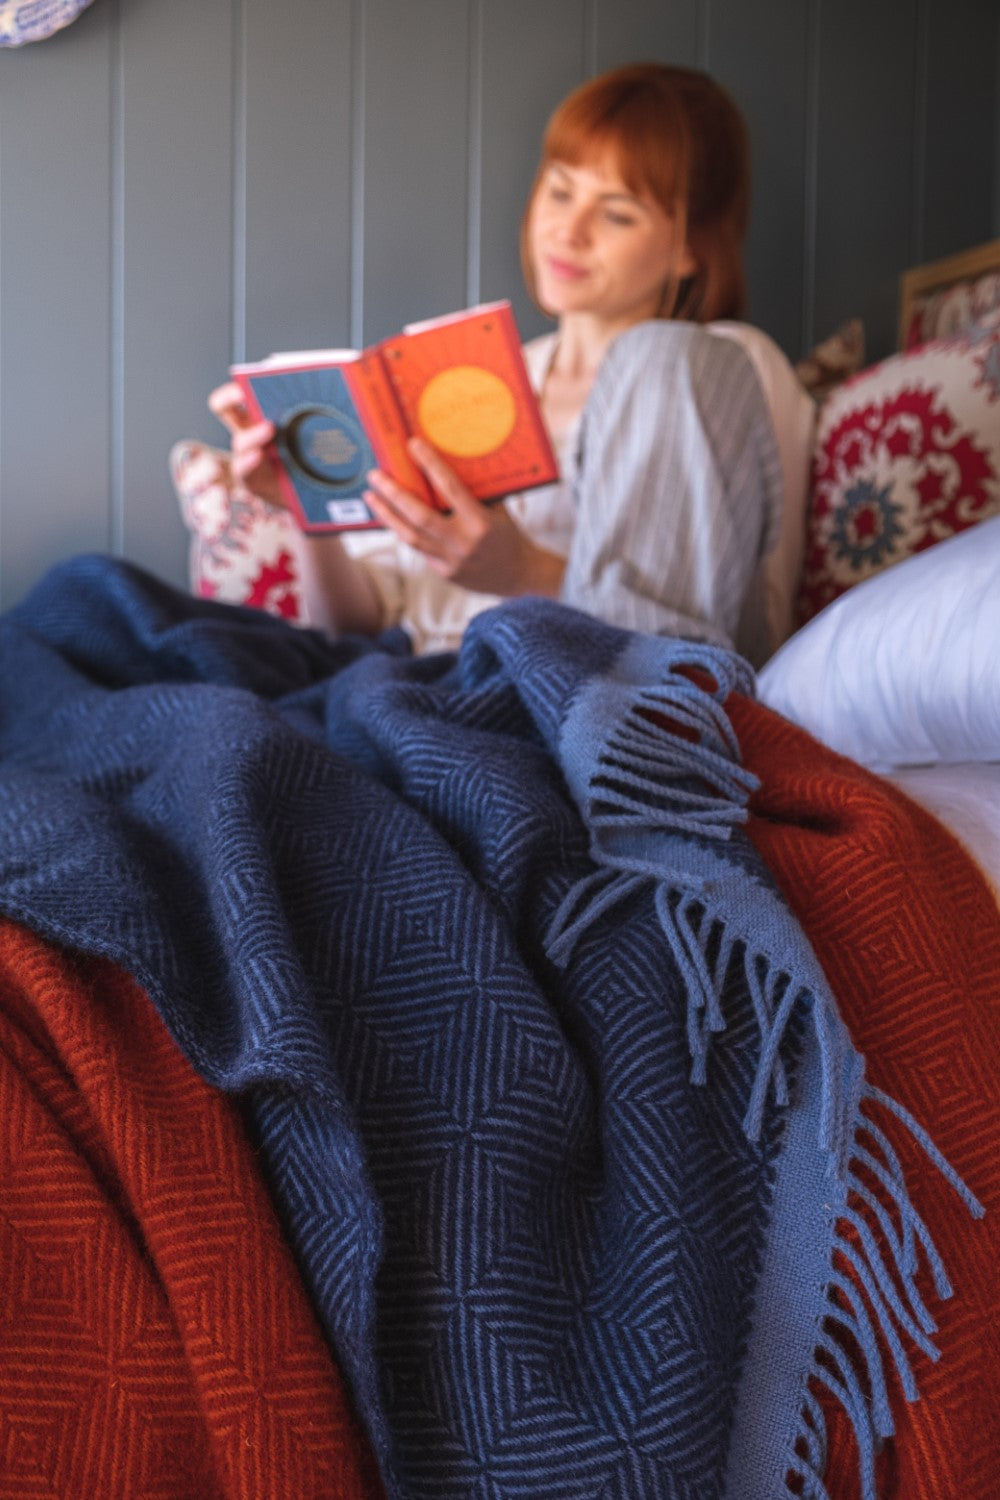 Blue and red wool throws draped over a bed. A woman is sitting in the background reading a book